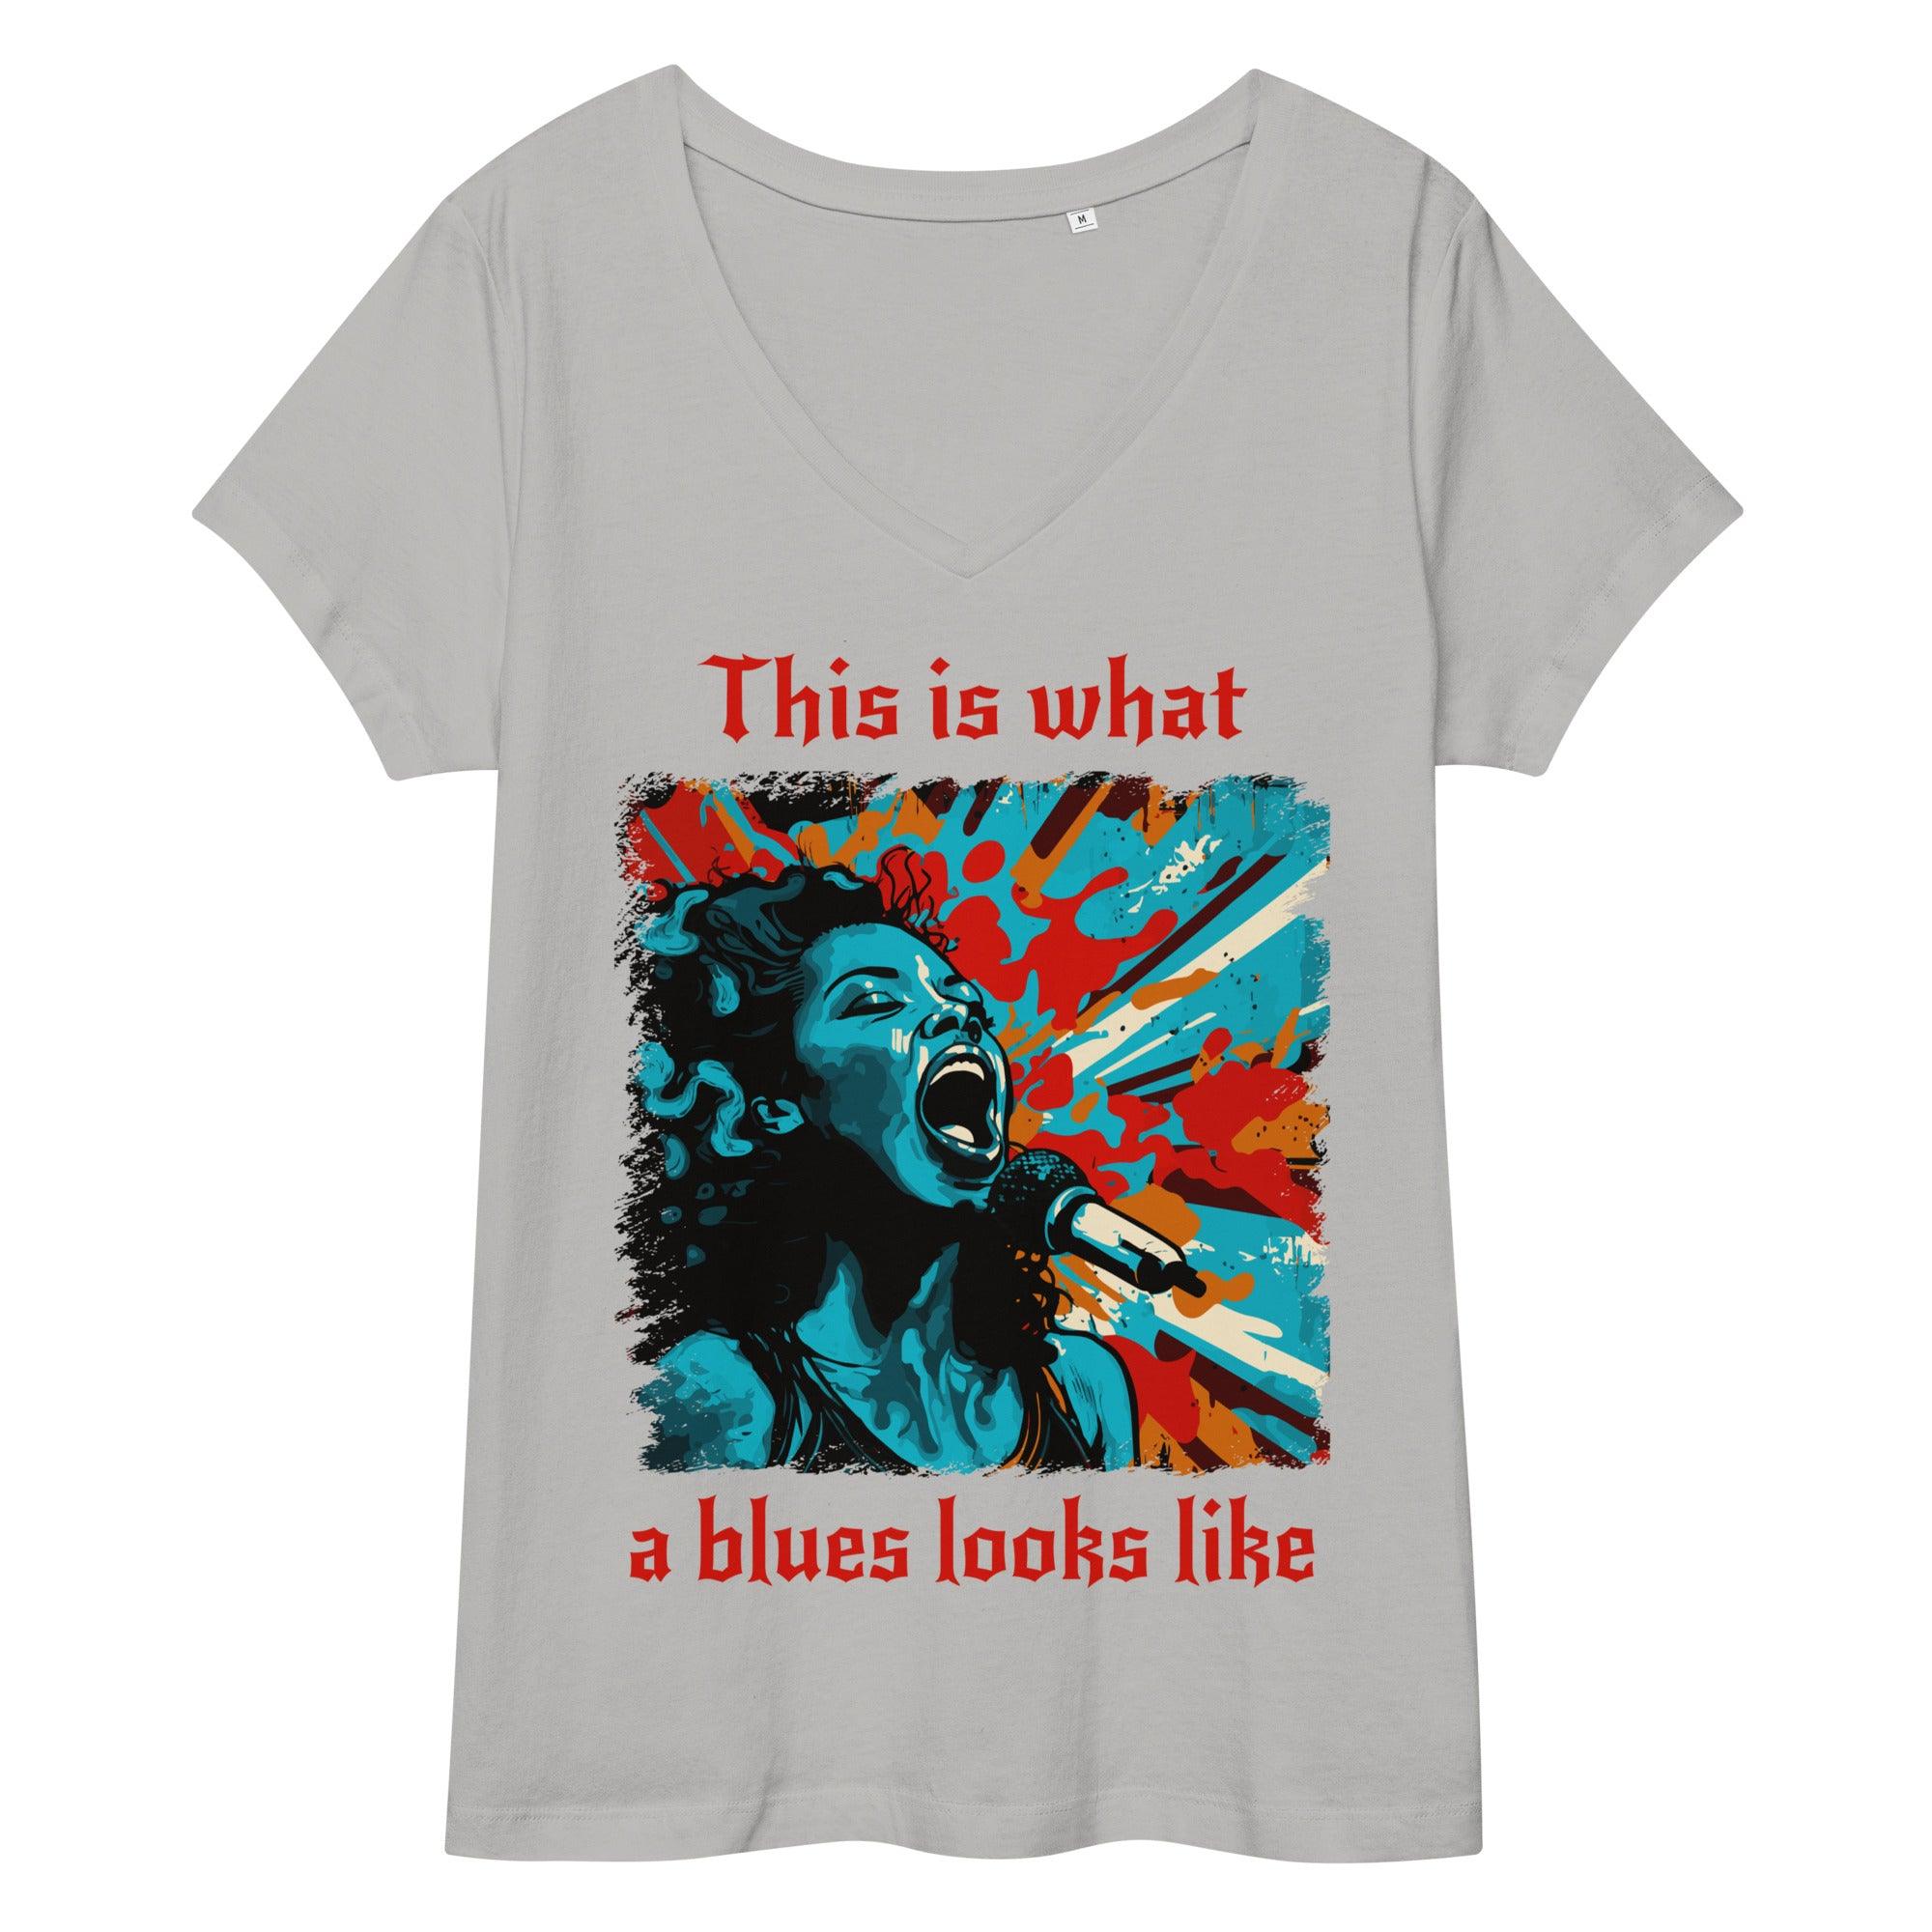 What A Blues looks Like Women’s fitted v-neck t-shirt - Beyond T-shirts